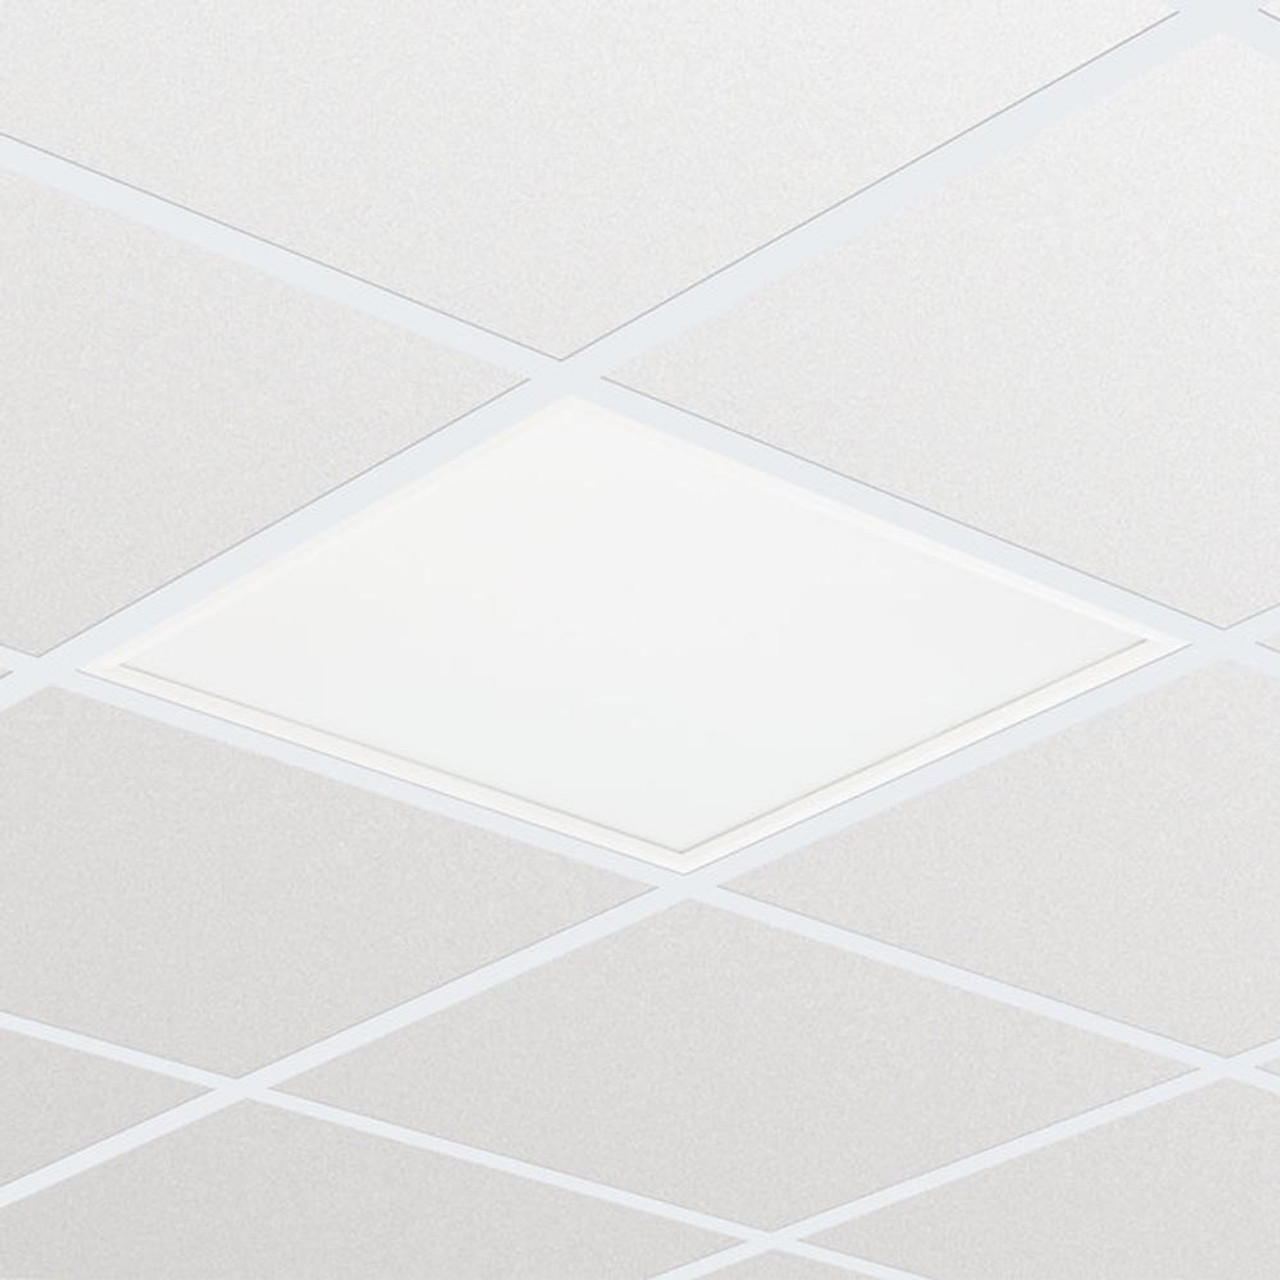 CoreLine 2ft x 2ft LED Panel Cool White 34.5W 4300lm Recessed Emergency